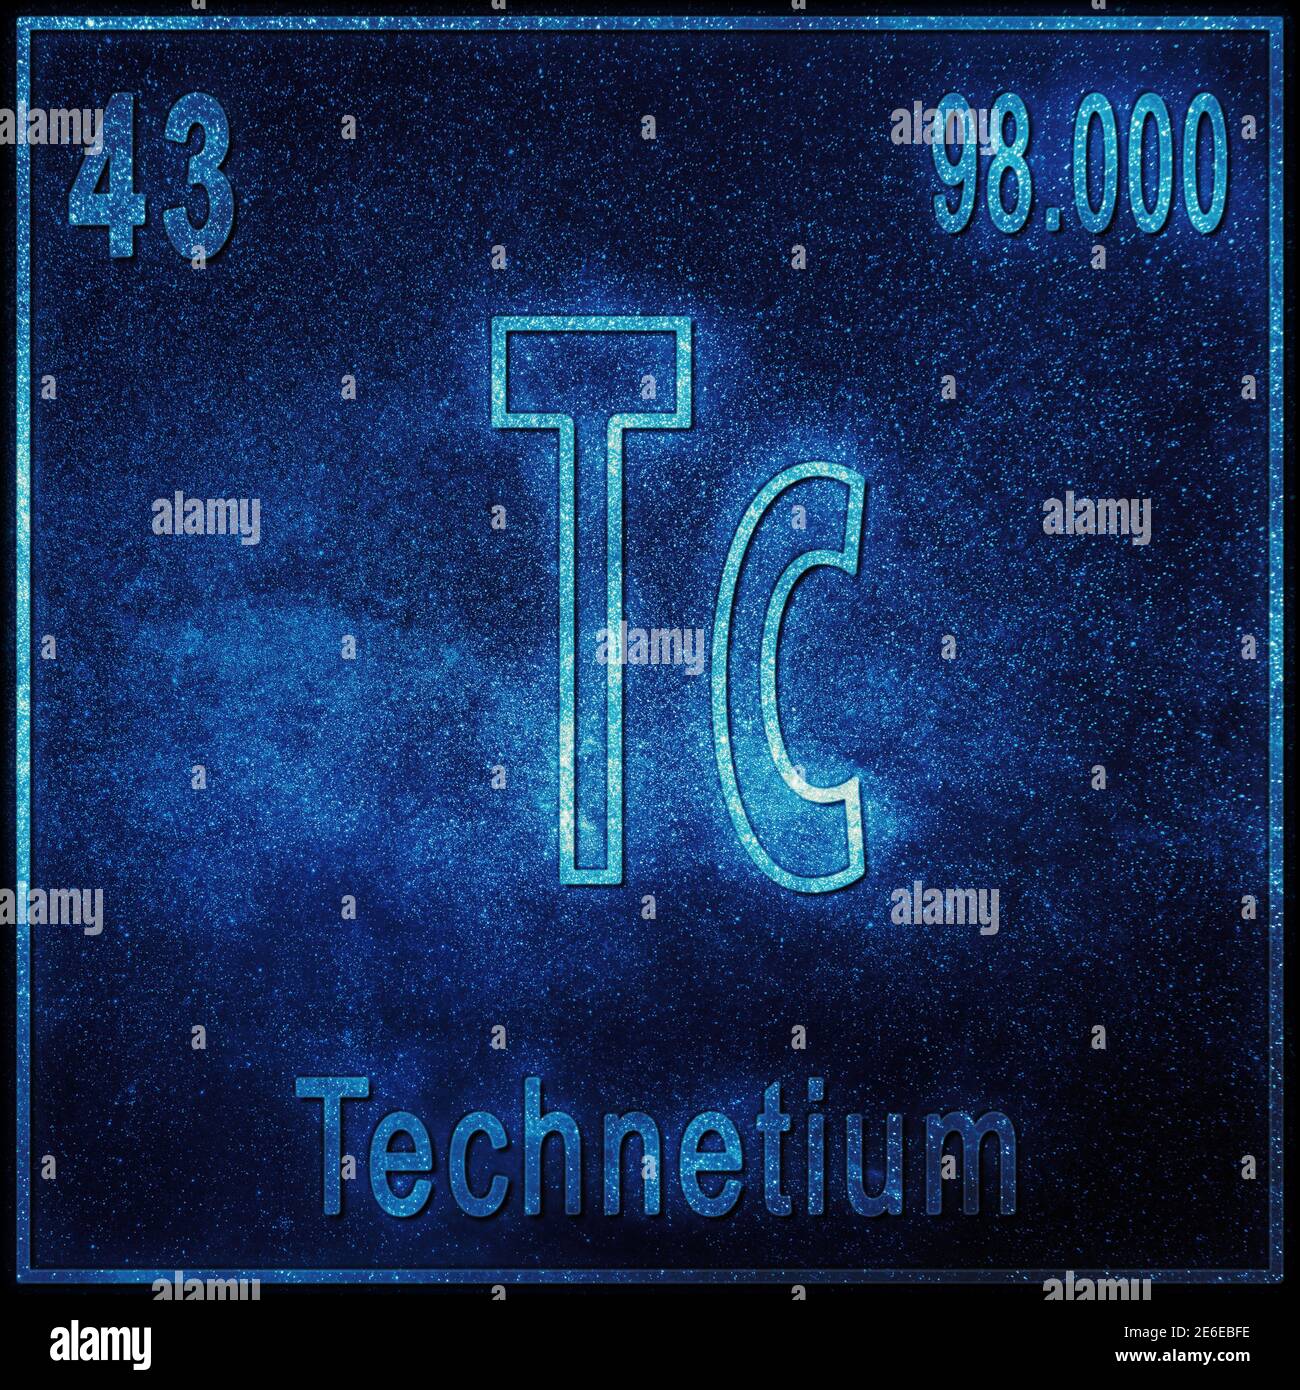 Technetium chemical element, Sign with atomic number and atomic weight, Periodic Table Element Stock Photo